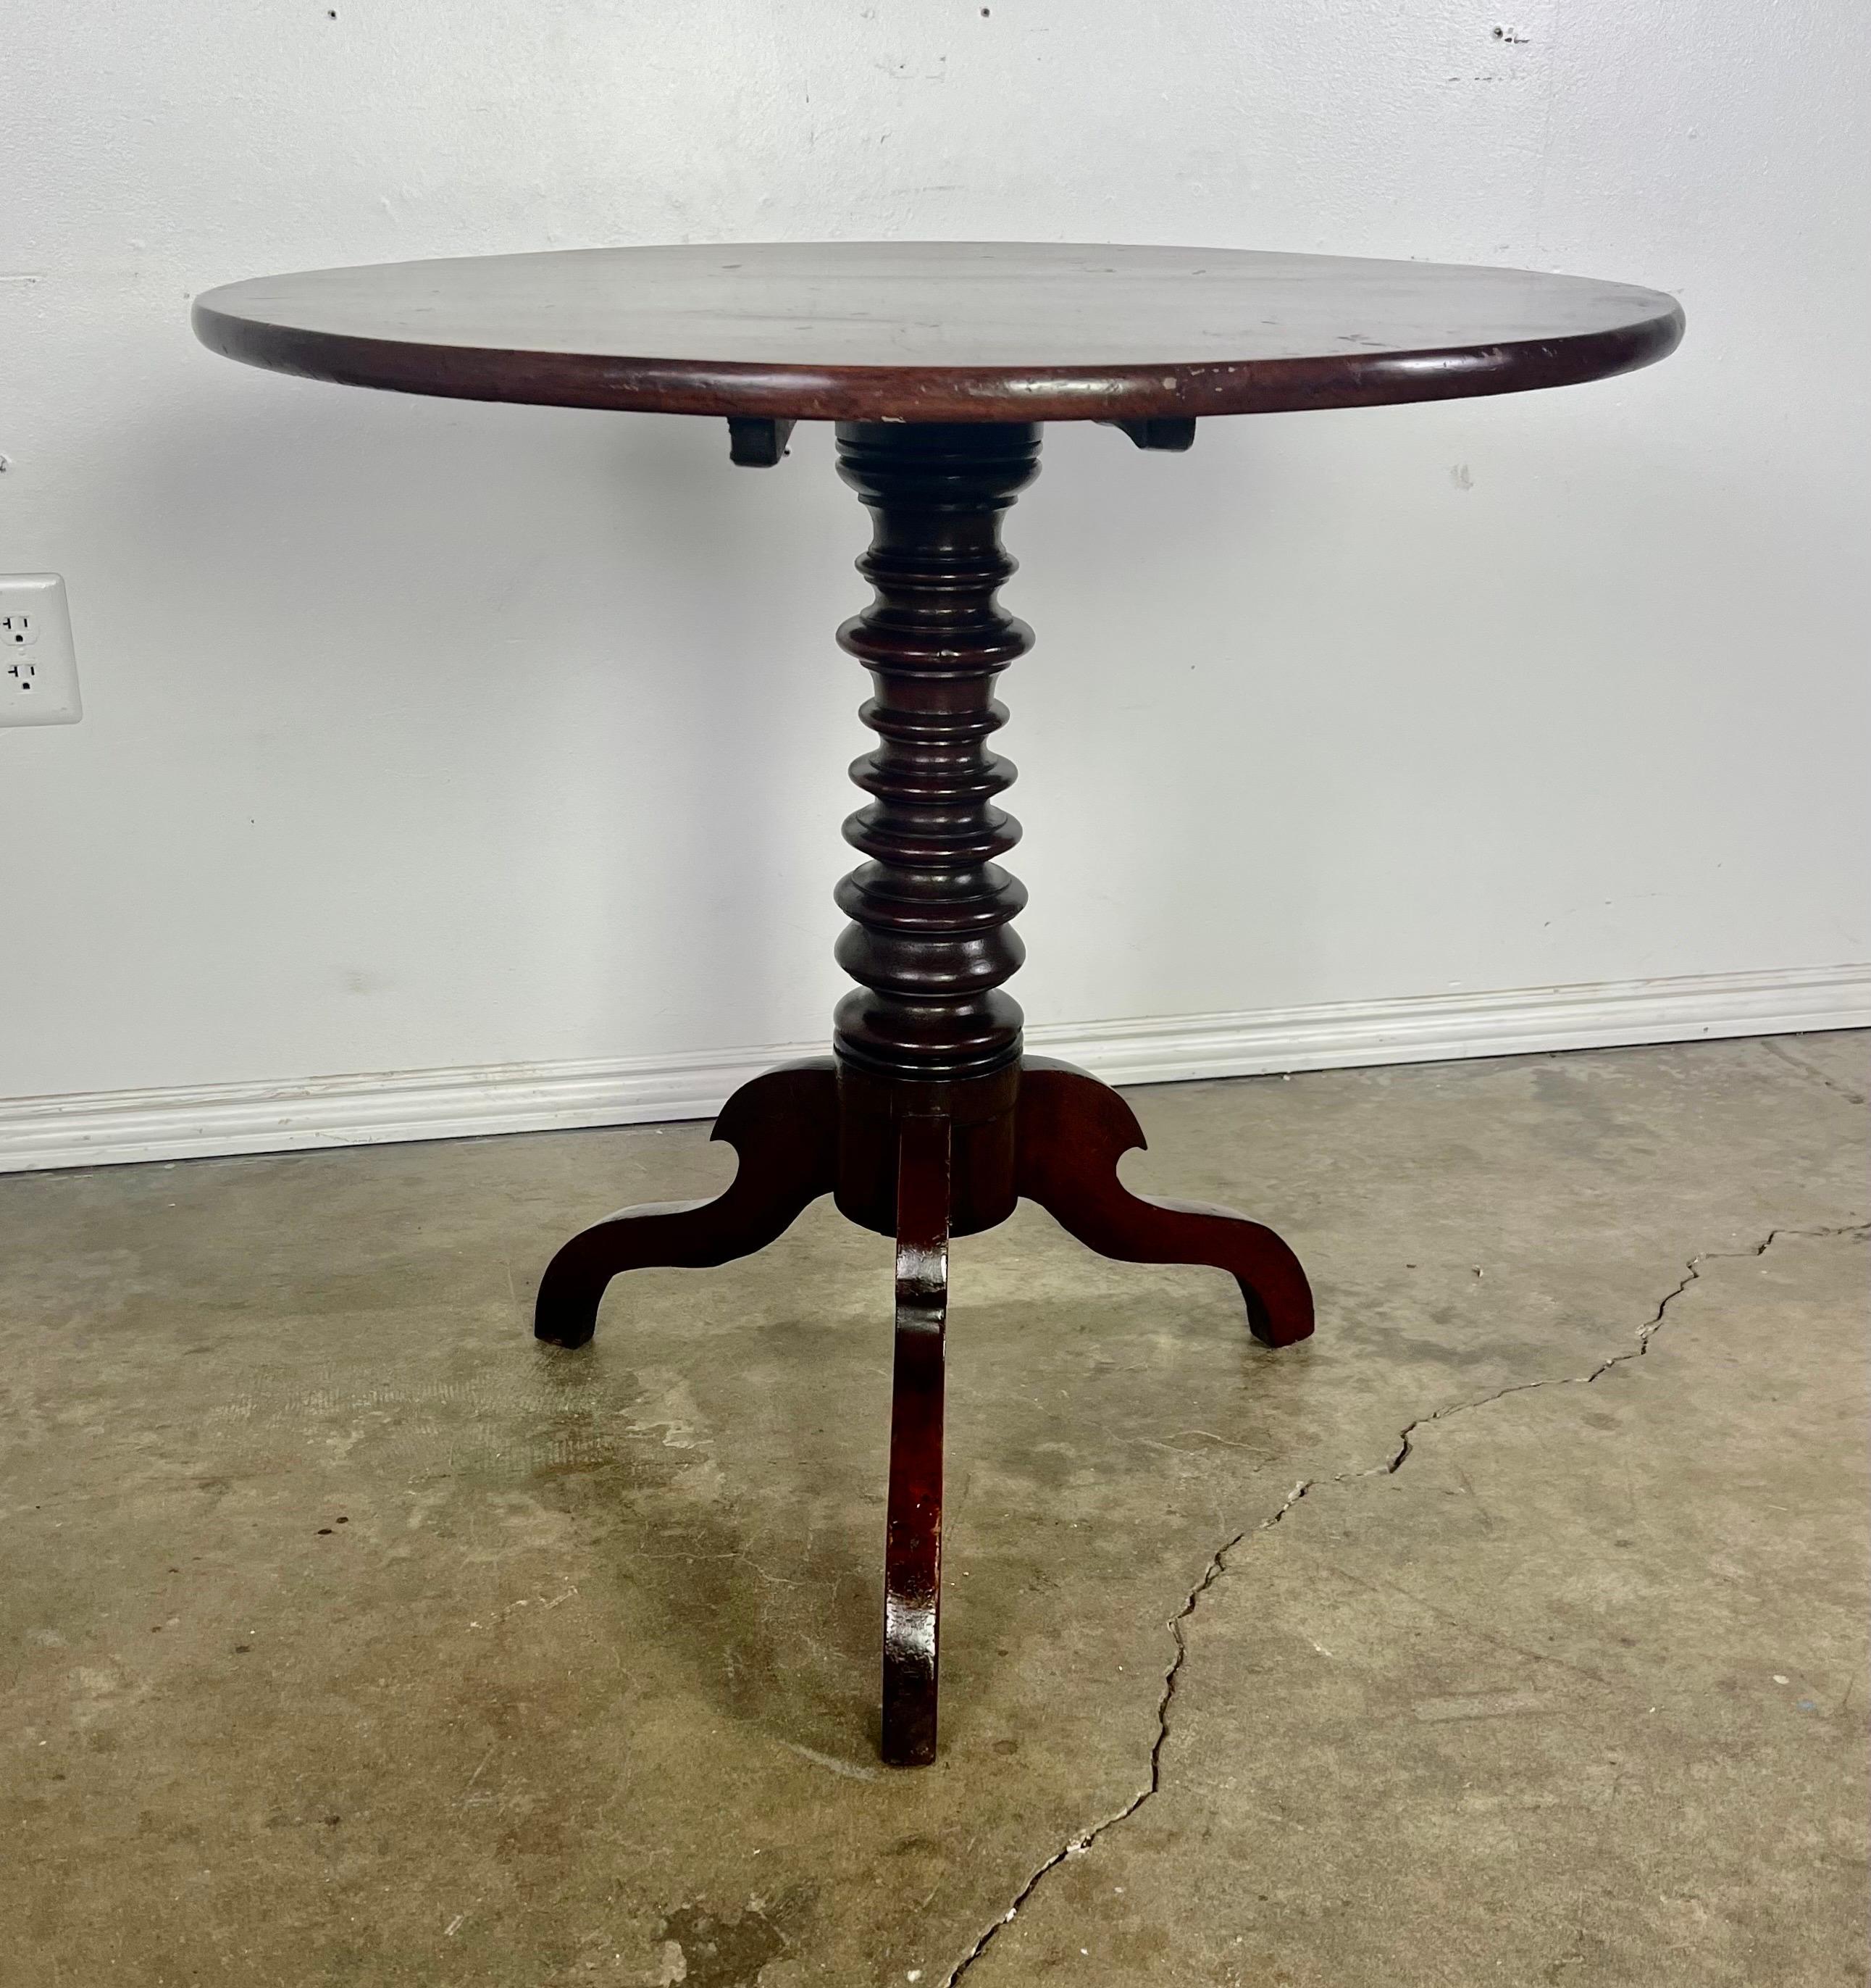 Early 20th century Mahogany tilt top side table.  The beautiful turned column ends in a tripod base.  The top will tilt for easy storage.